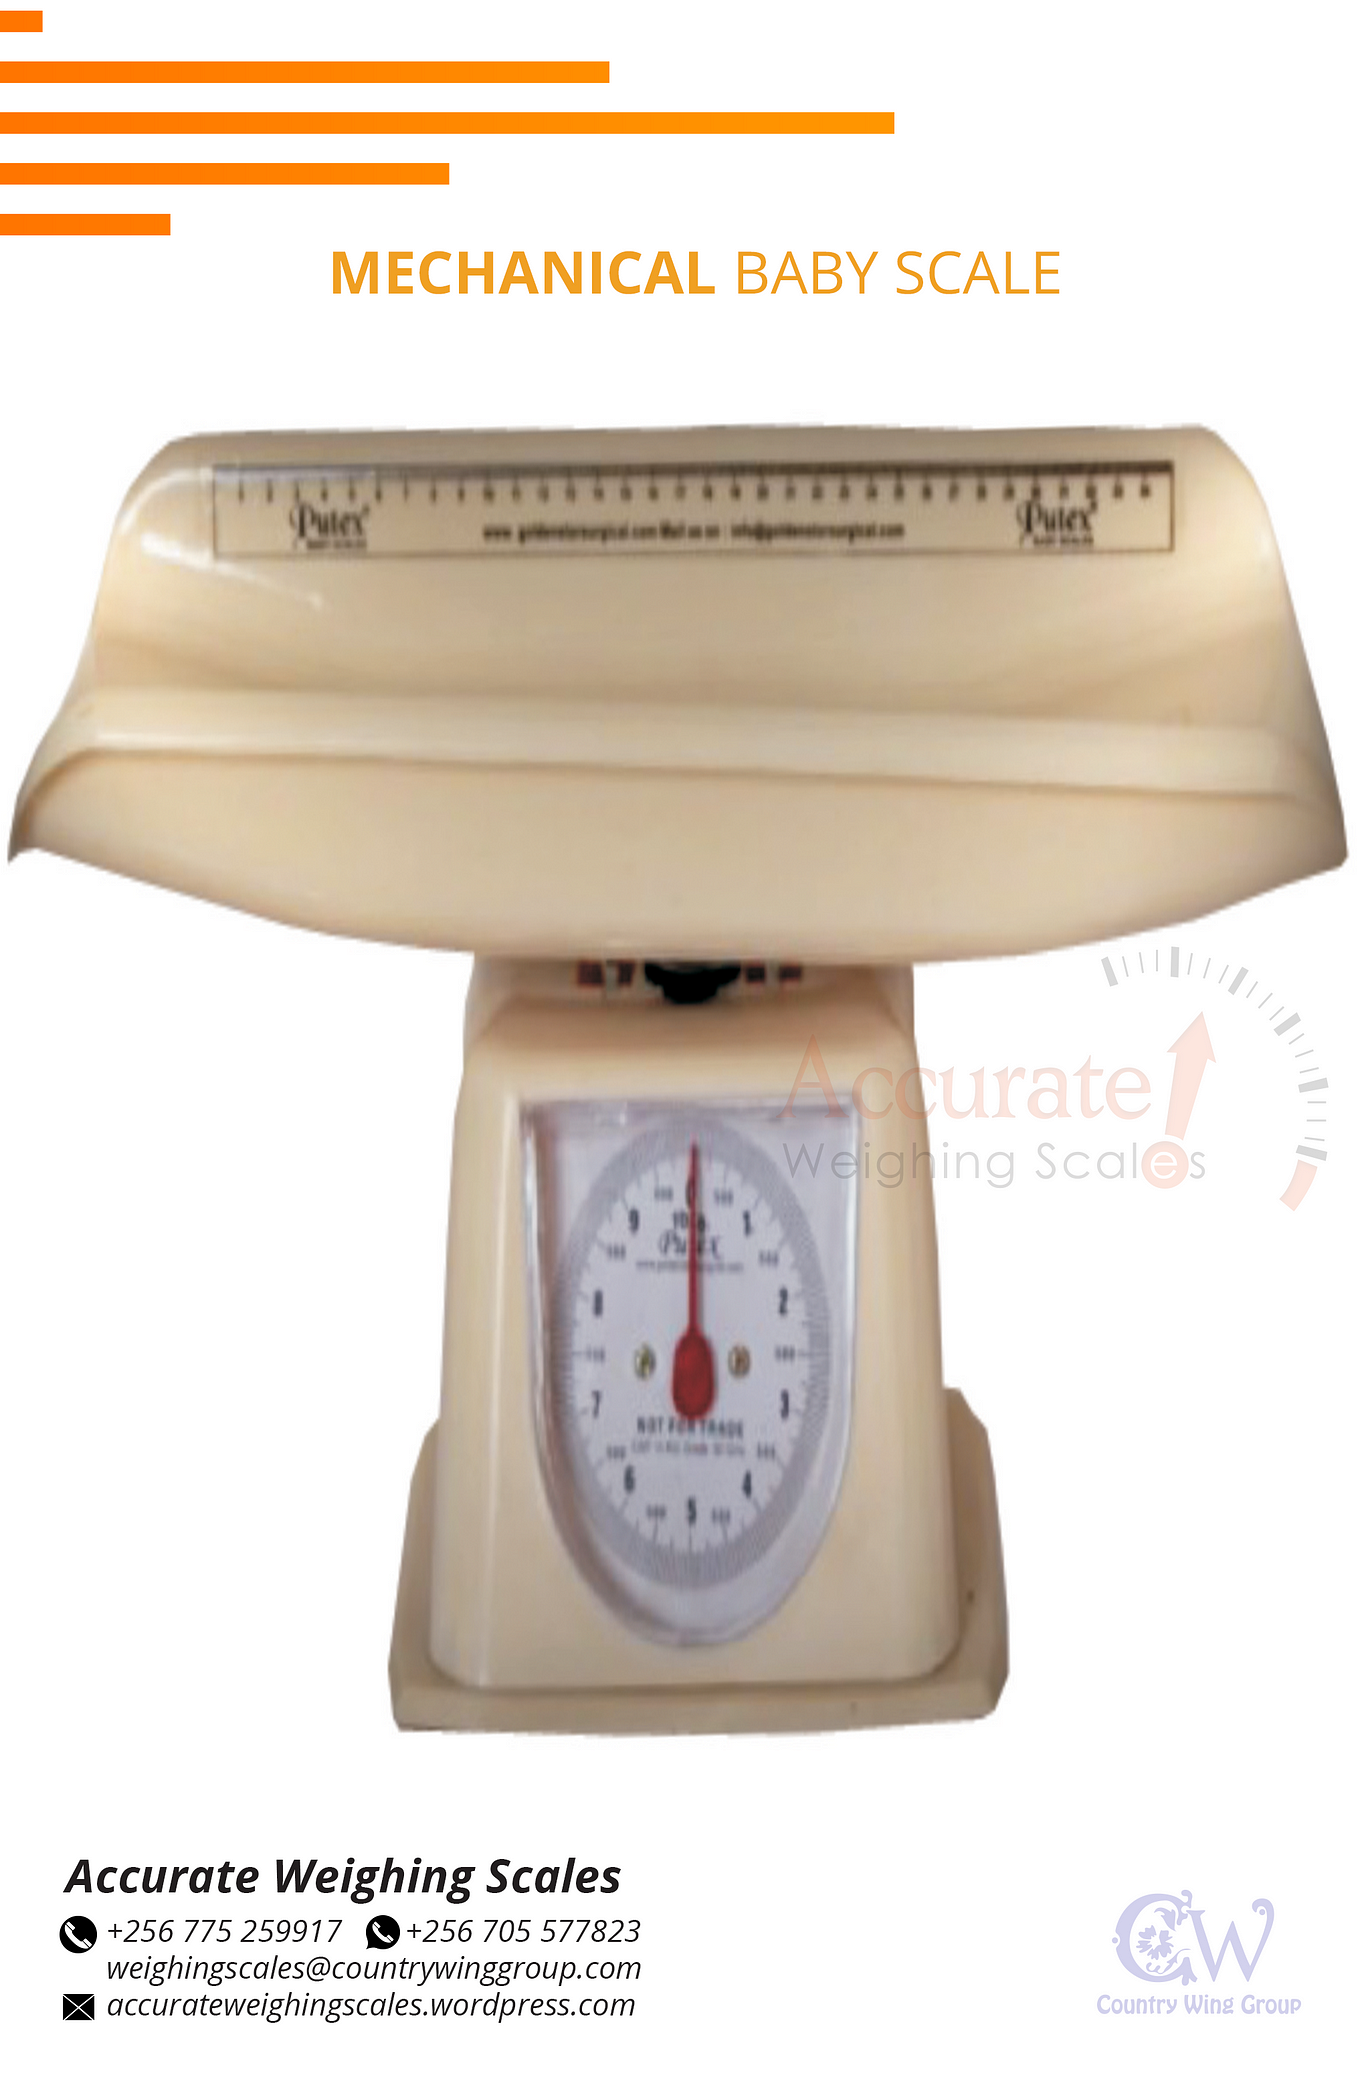 Mechanical Infant Weighing Scale